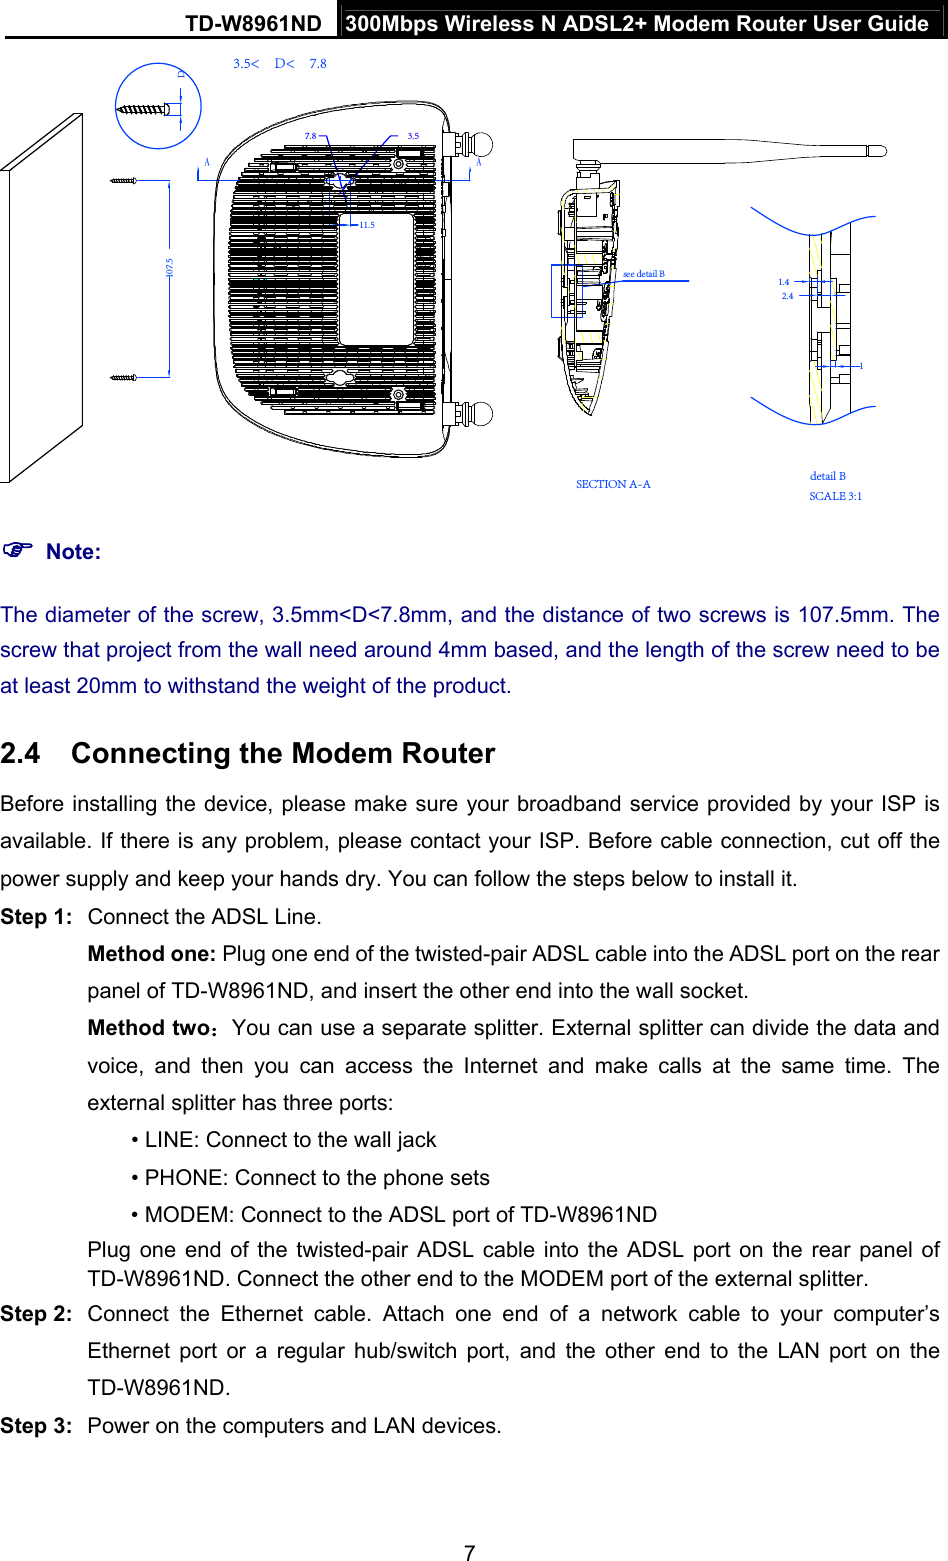 TD-W8961ND  300Mbps Wireless N ADSL2+ Modem Router User Guide  7　DSECTION A-A SCALE 3:1detail B2.41.41　3.5&lt;　D&lt;　7.8 3.5 7.8A107.511.5Asee detail B  Note: The diameter of the screw, 3.5mm&lt;D&lt;7.8mm, and the distance of two screws is 107.5mm. The screw that project from the wall need around 4mm based, and the length of the screw need to be at least 20mm to withstand the weight of the product. 2.4  Connecting the Modem Router Before installing the device, please make sure your broadband service provided by your ISP is available. If there is any problem, please contact your ISP. Before cable connection, cut off the power supply and keep your hands dry. You can follow the steps below to install it. Step 1:  Connect the ADSL Line. Method one: Plug one end of the twisted-pair ADSL cable into the ADSL port on the rear panel of TD-W8961ND, and insert the other end into the wall socket. Method two：You can use a separate splitter. External splitter can divide the data and voice, and then you can access the Internet and make calls at the same time. The external splitter has three ports: • LINE: Connect to the wall jack • PHONE: Connect to the phone sets • MODEM: Connect to the ADSL port of TD-W8961ND Plug one end of the twisted-pair ADSL cable into the ADSL port on the rear panel of TD-W8961ND. Connect the other end to the MODEM port of the external splitter. Step 2:  Connect the Ethernet cable. Attach one end of a network cable to your computer’s Ethernet port or a regular hub/switch port, and the other end to the LAN port on the TD-W8961ND. Step 3:  Power on the computers and LAN devices. 